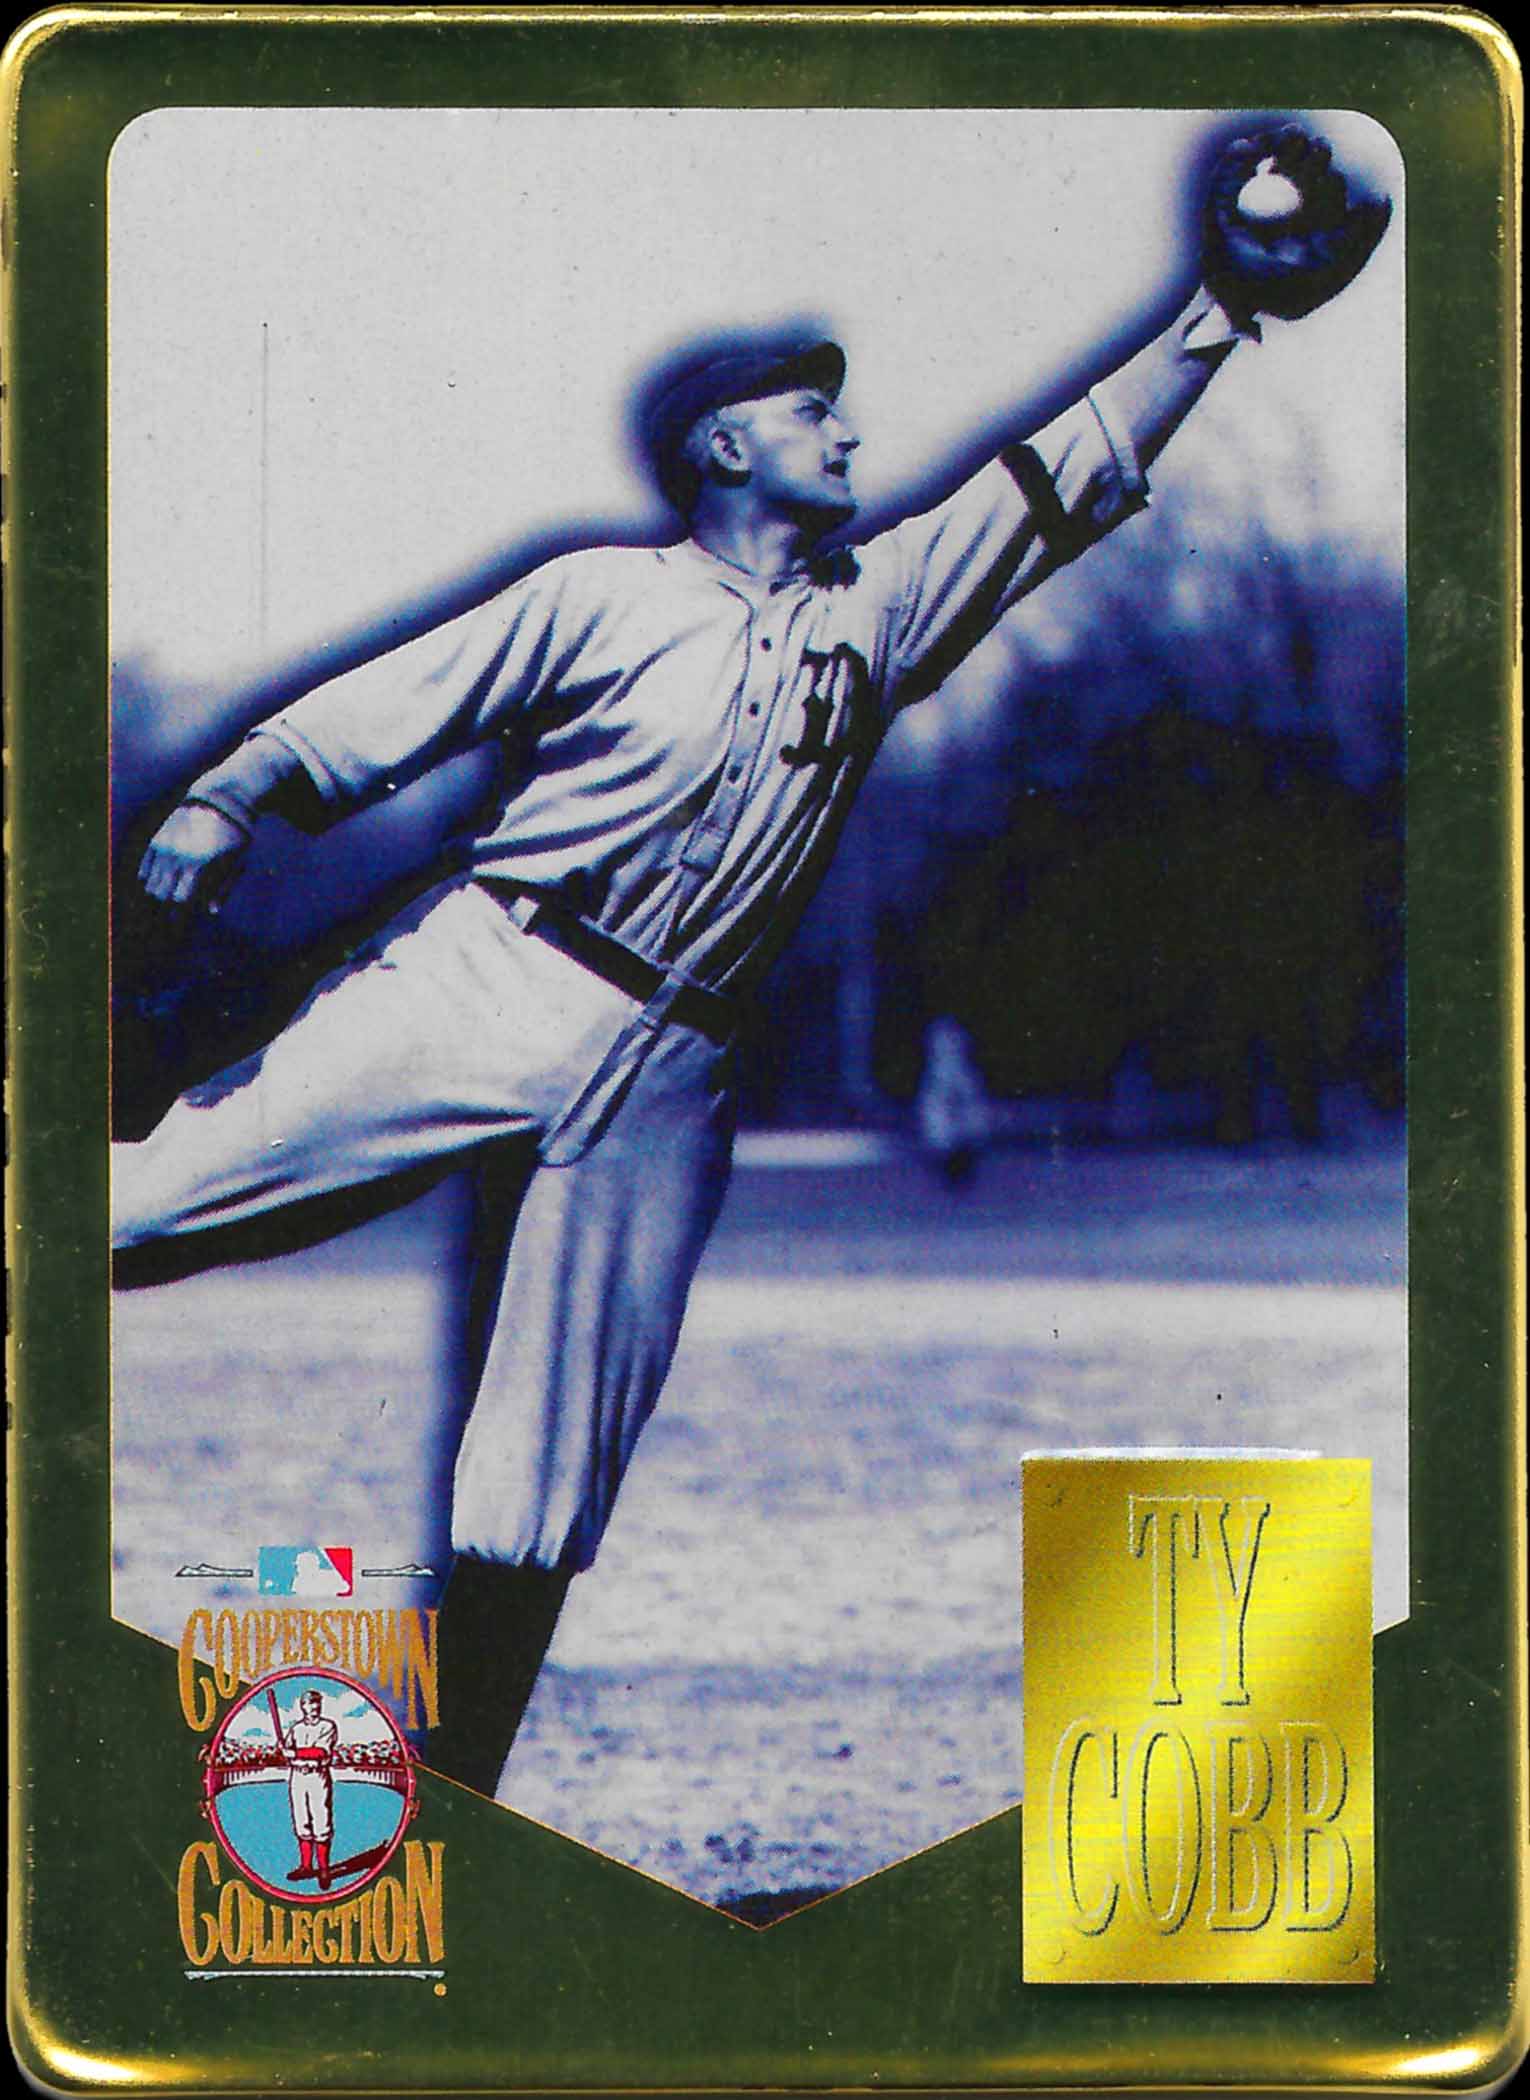 1996 Metallic Impressions Cooperstown Collection Hall of Fame Inductees